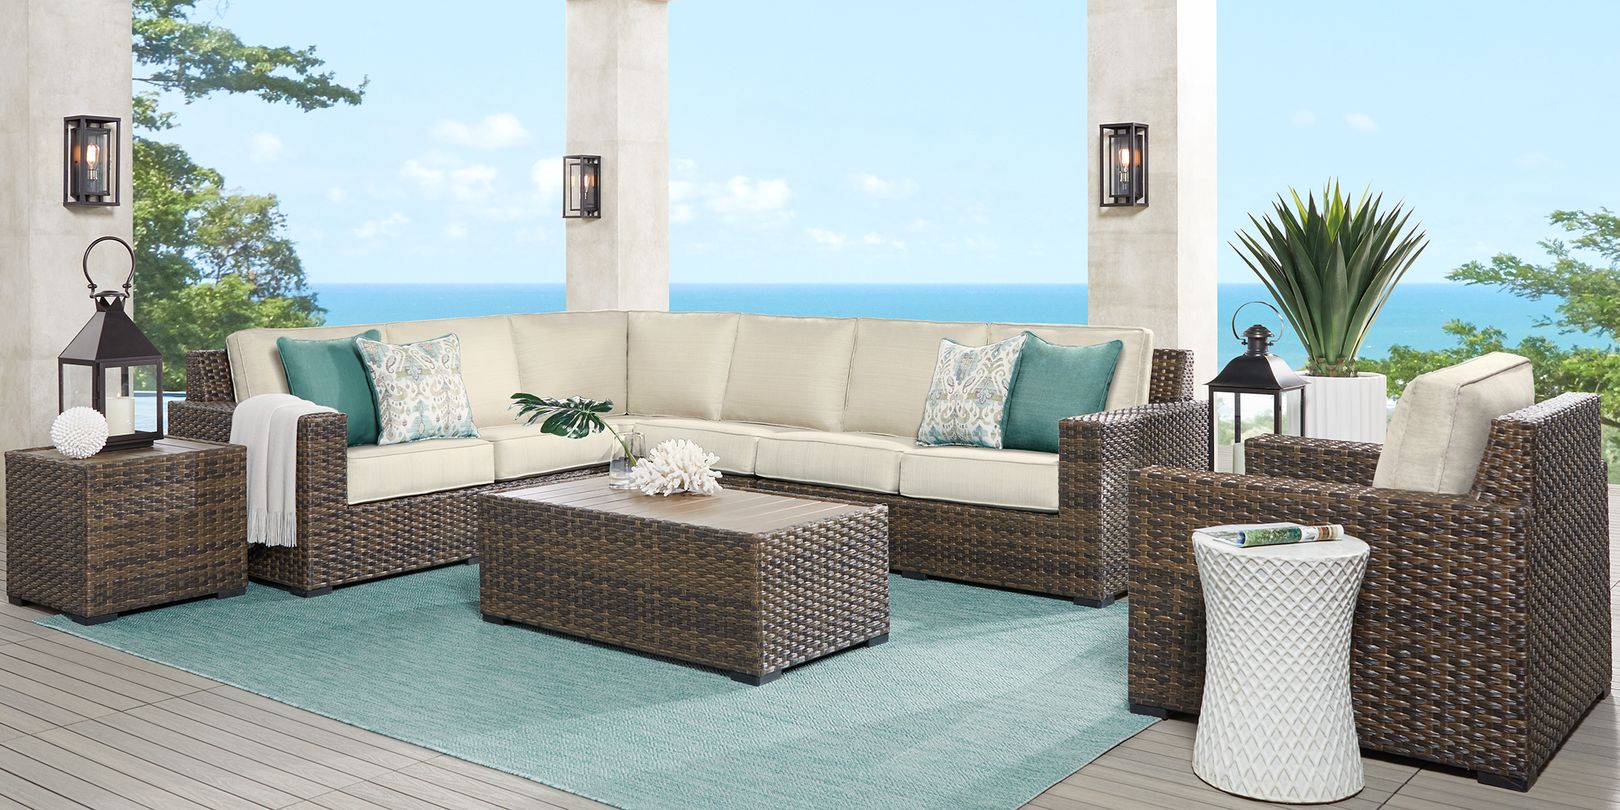 Photo of a brown wicker patio seating set with putty colored cushions